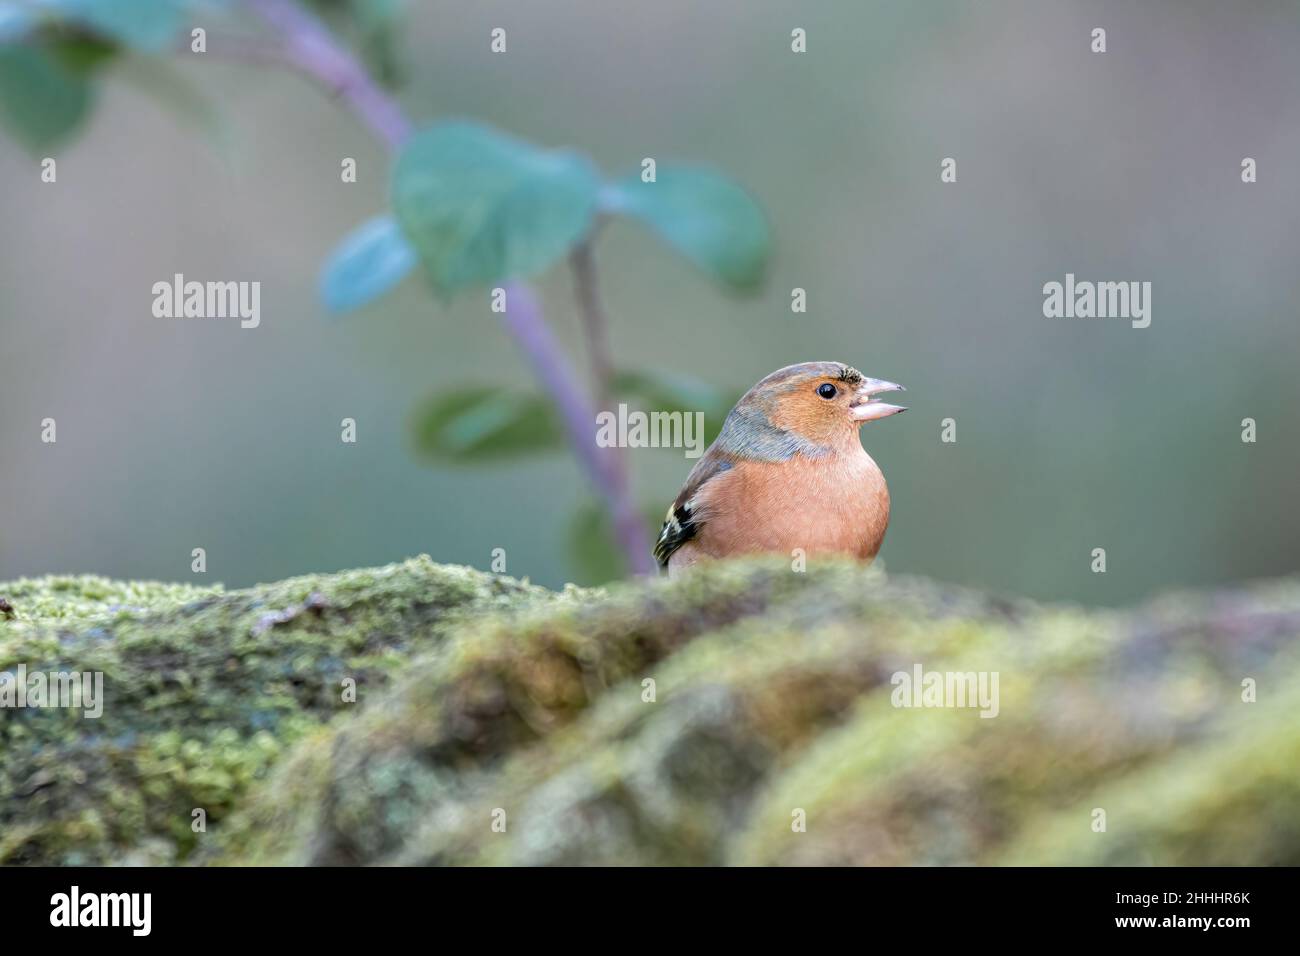 Male Chaffinch, or Common Chaffinch Fringilla coelebs feeding in a natural woodland setting during winter in the UK. Stock Photo